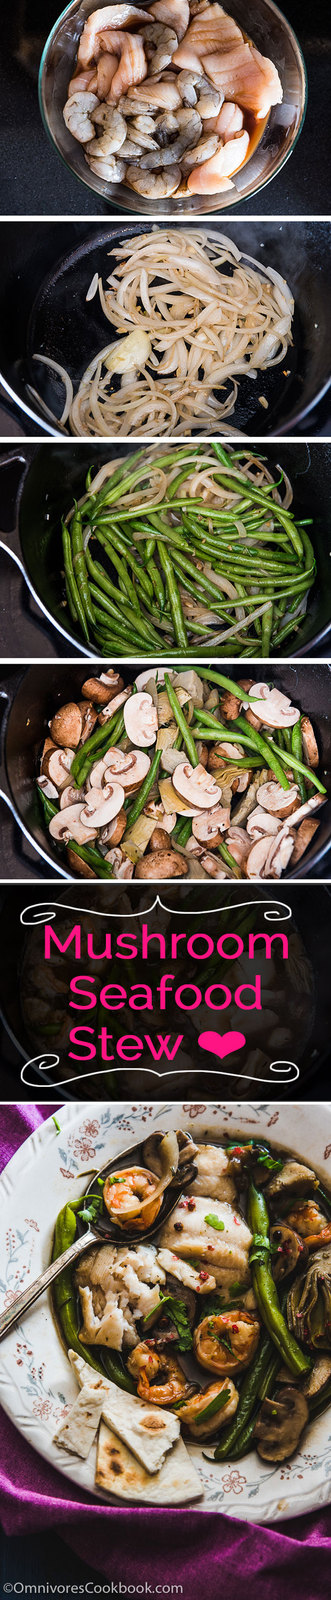 Mushroom Seafood Stew - Packed with lean protein and vegetables. It’s a hearty weekday meal that you can cook and prep in under 30 minutes! | omnivorescookbook.com